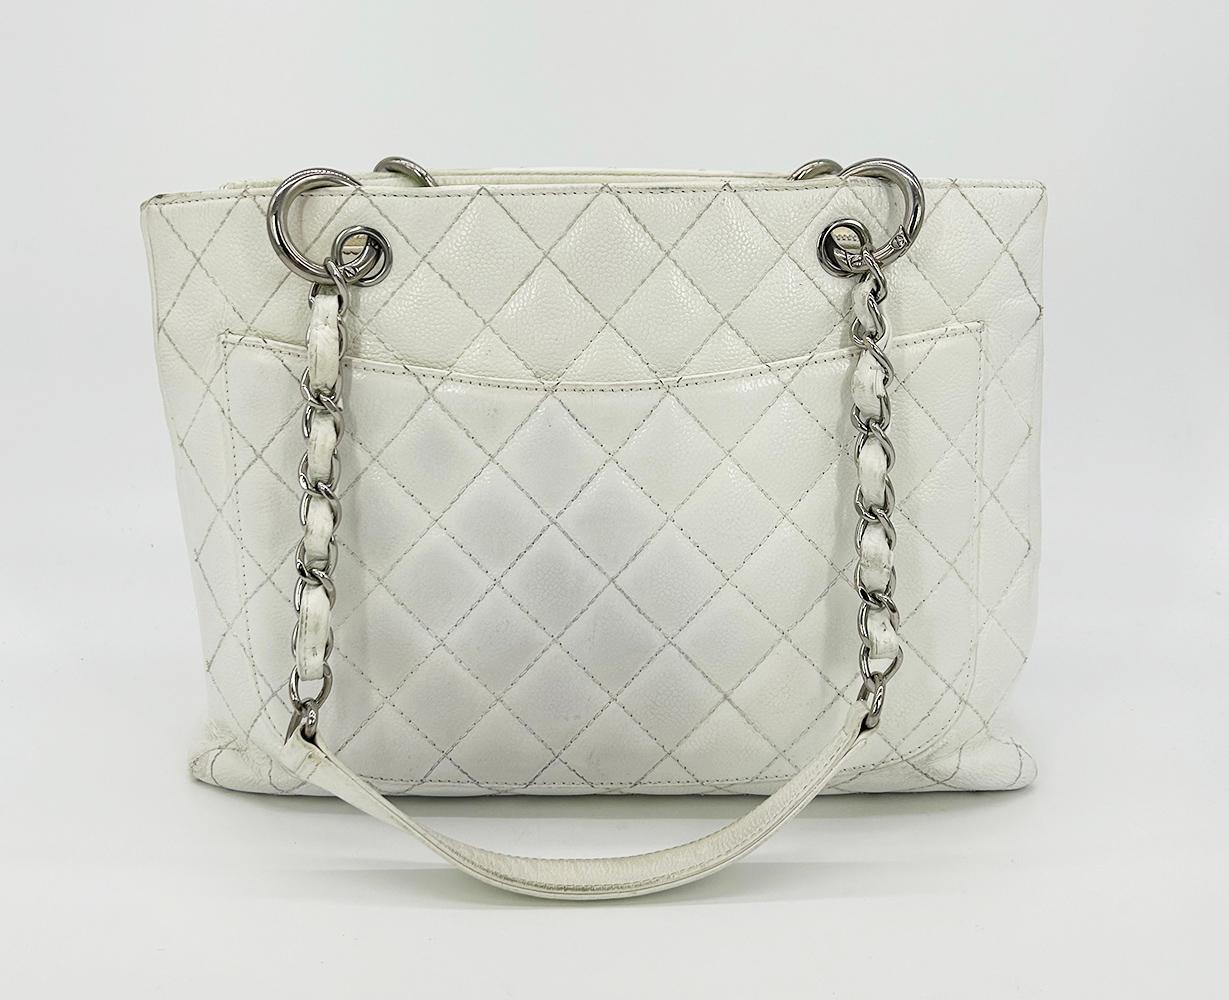 Chanel Quilted White Caviar Grand Shopper Tote in fair condition. Quilted white caviar leather exterior trimmed with silver leather and siganture CC Chanel logo along front side and back slit pocket. Woven chain and leather shoulder strap handle